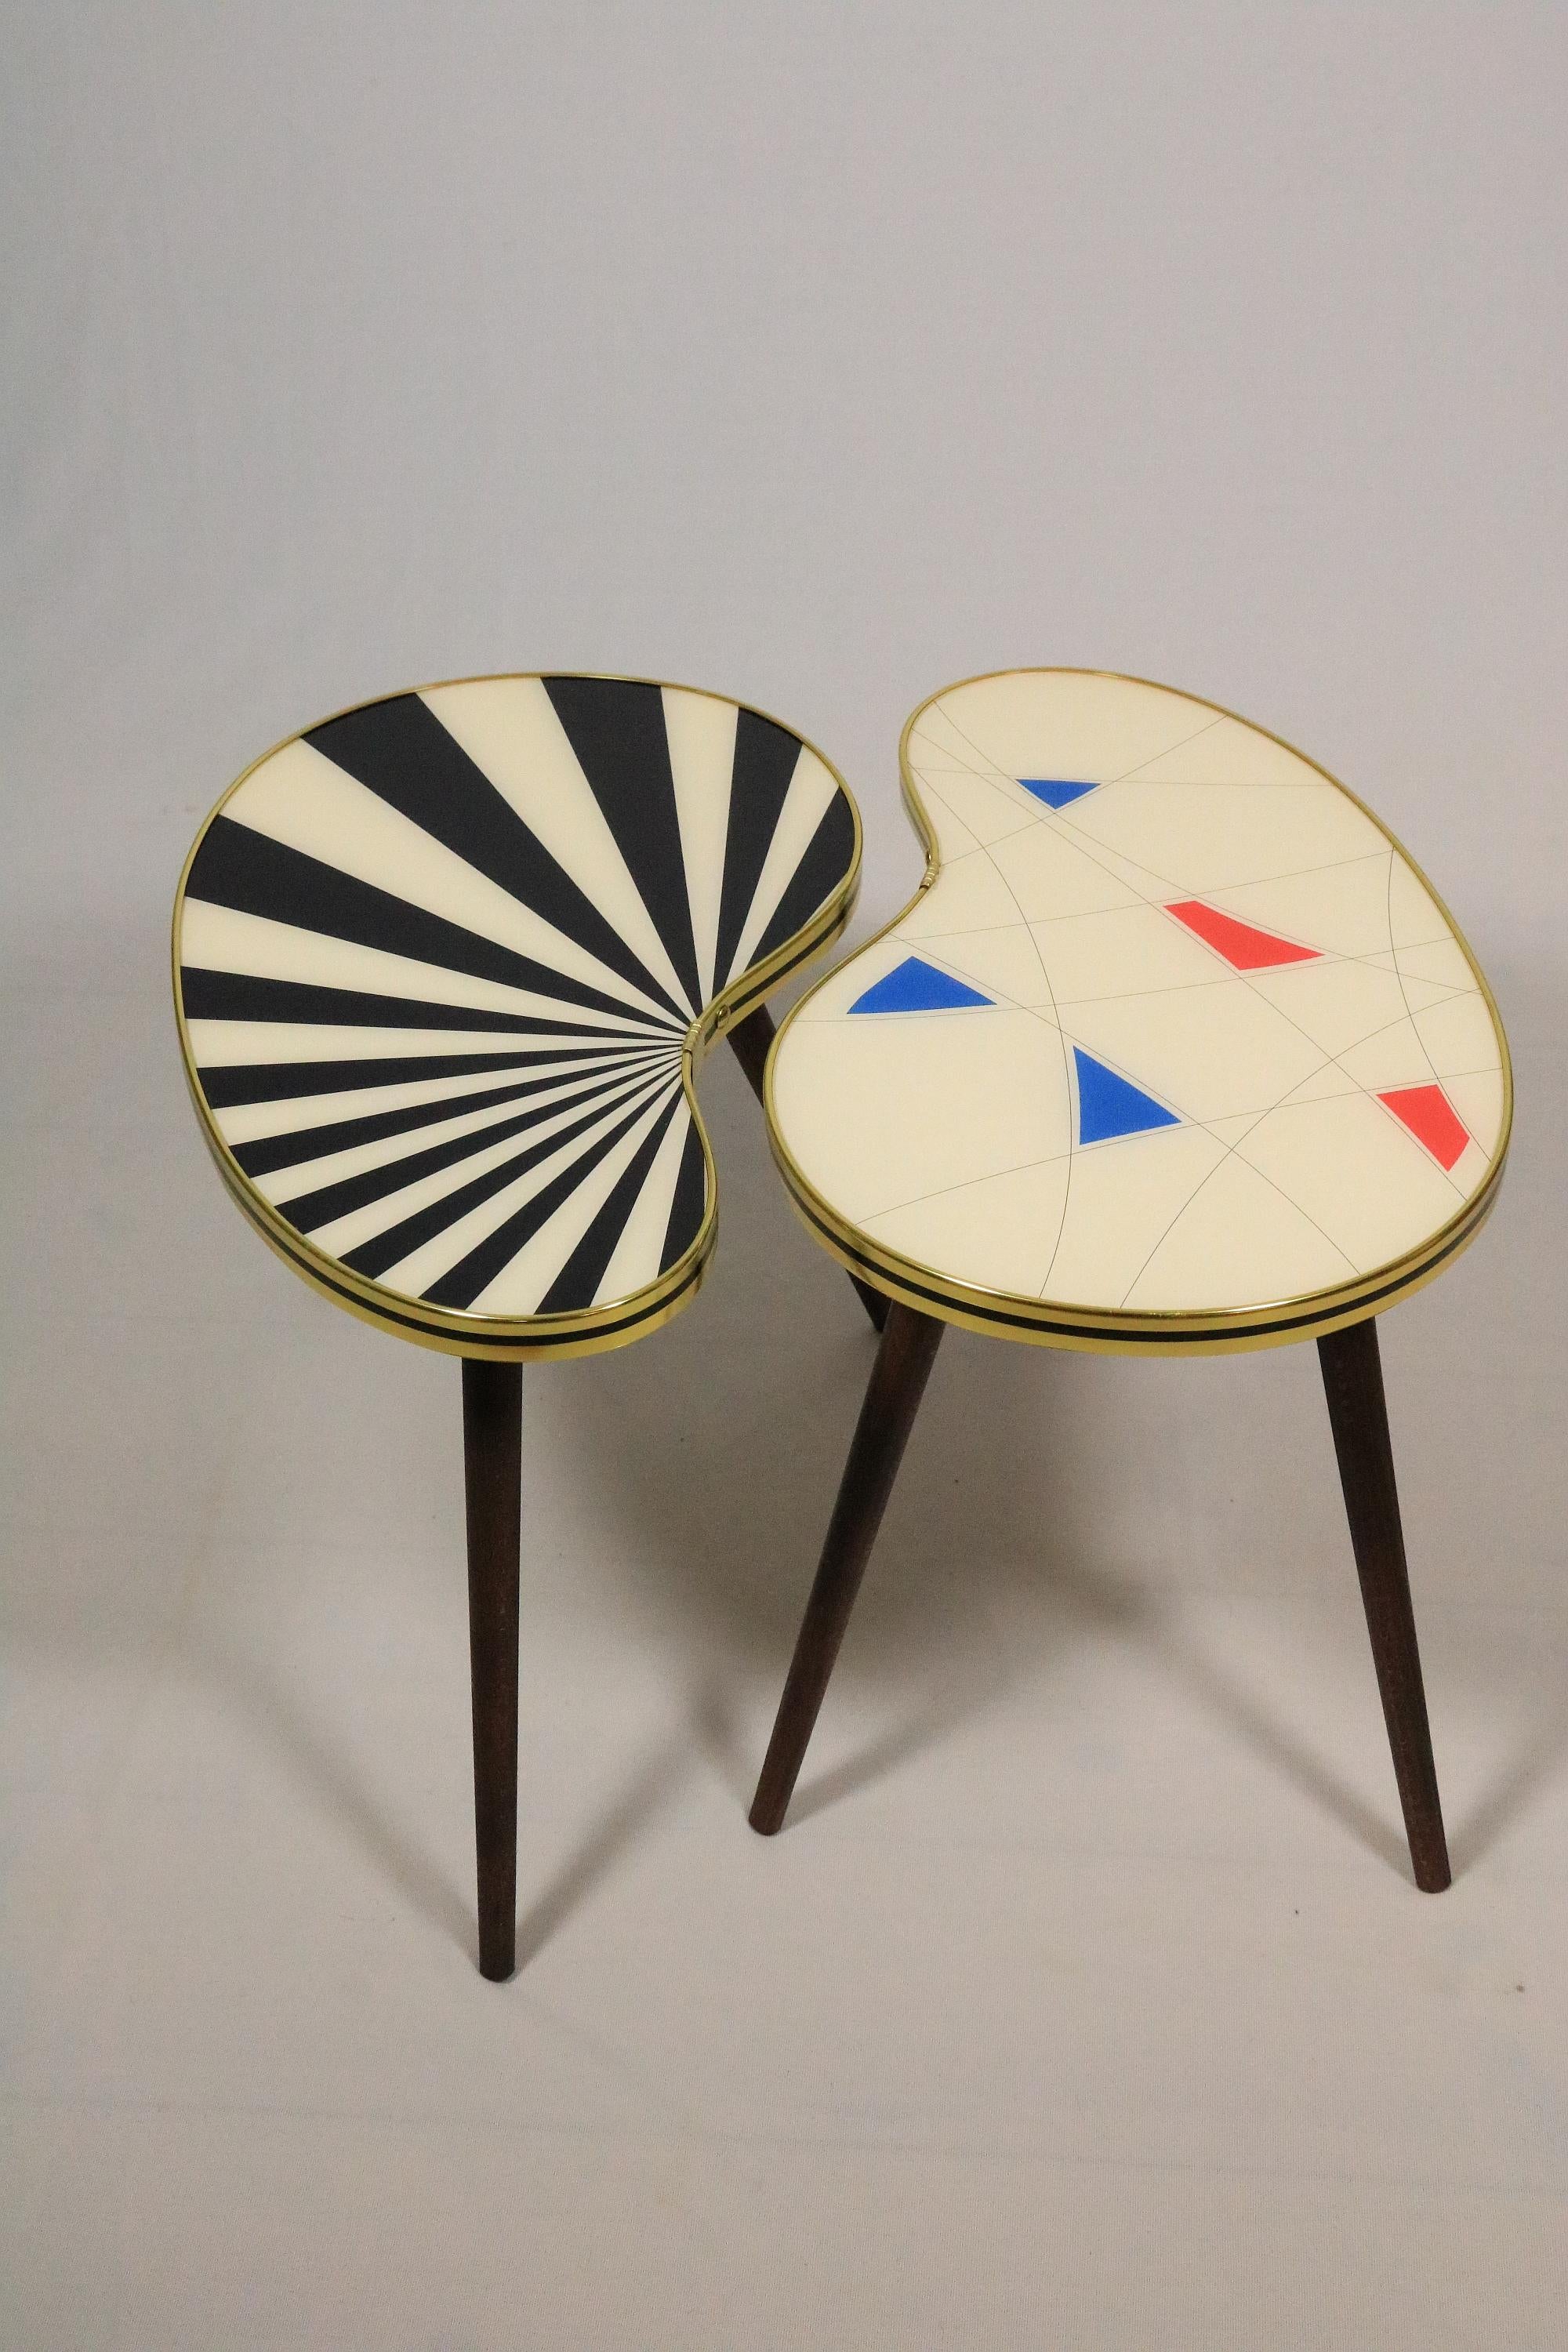 Small Side Table, Kidney Shaped, Pink-Taupe Stripes, 3 Elegant Legs, 50s Style For Sale 4